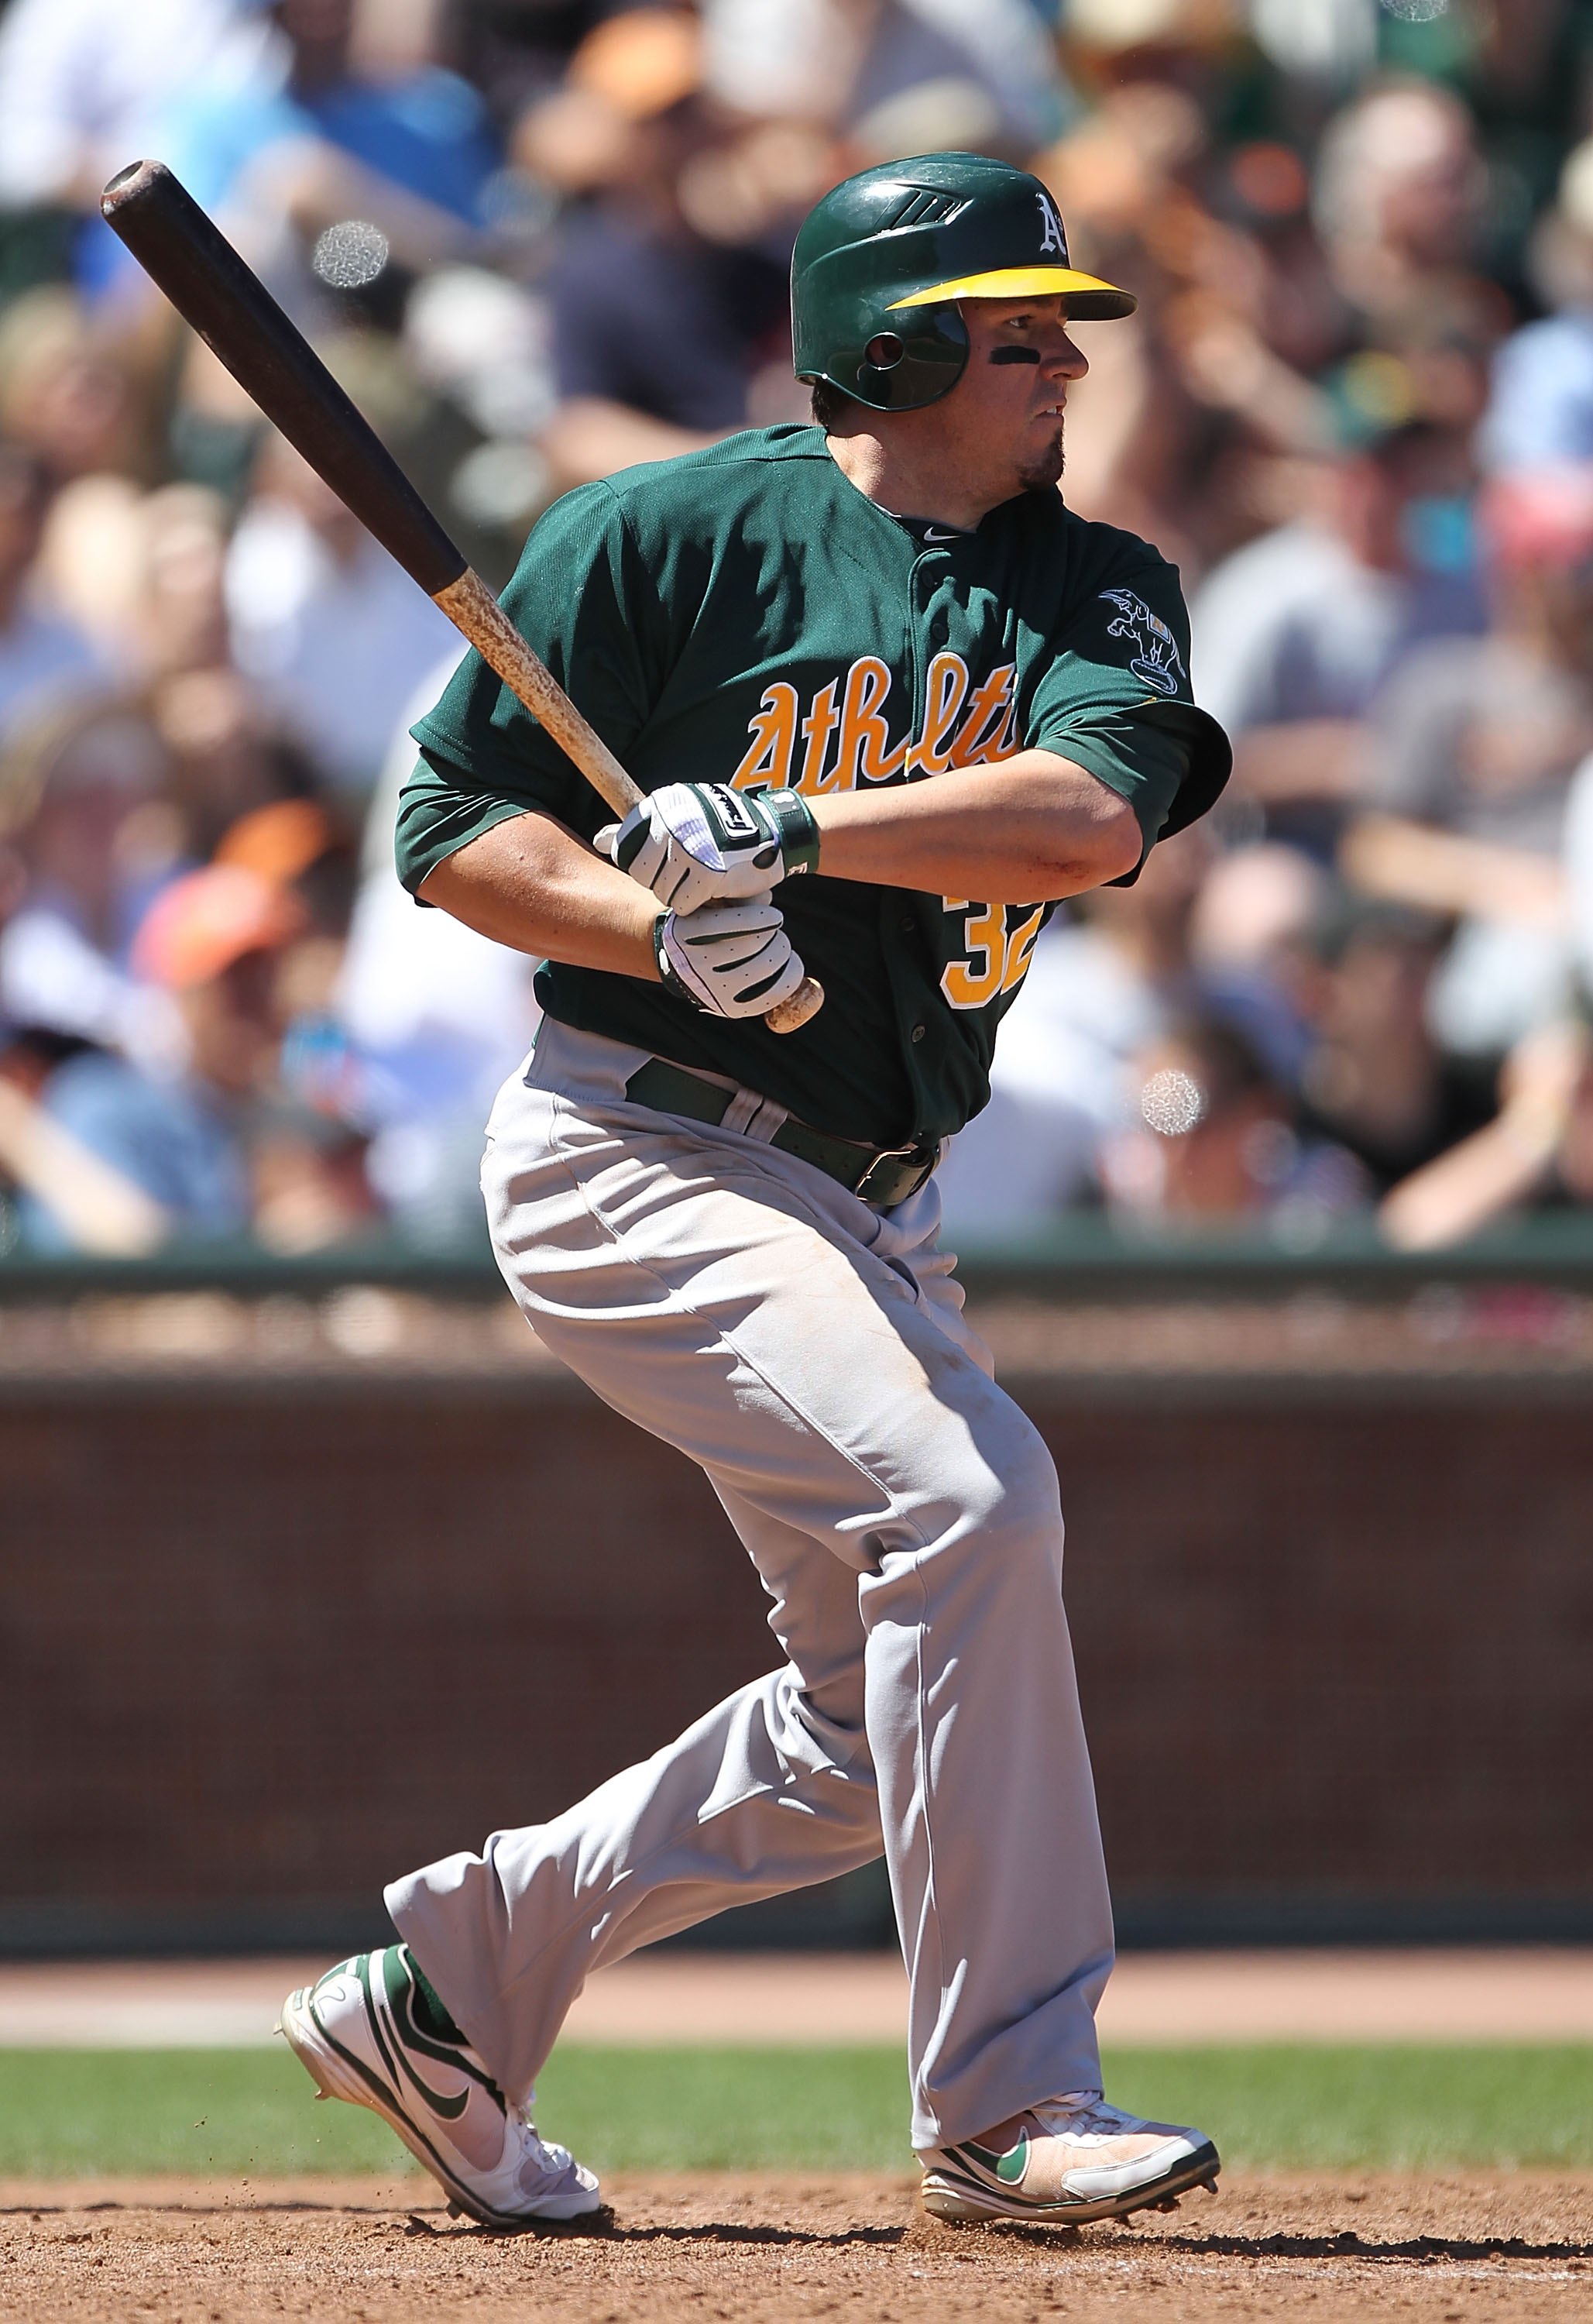 SAN FRANCISCO - JUNE 13:  Jack Cust #32 of the Oakland Athletics bats against the San Francisco Giants during an MLB game at AT&T Park on June 13, 2010 in San Francisco, California.  (Photo by Jed Jacobsohn/Getty Images)